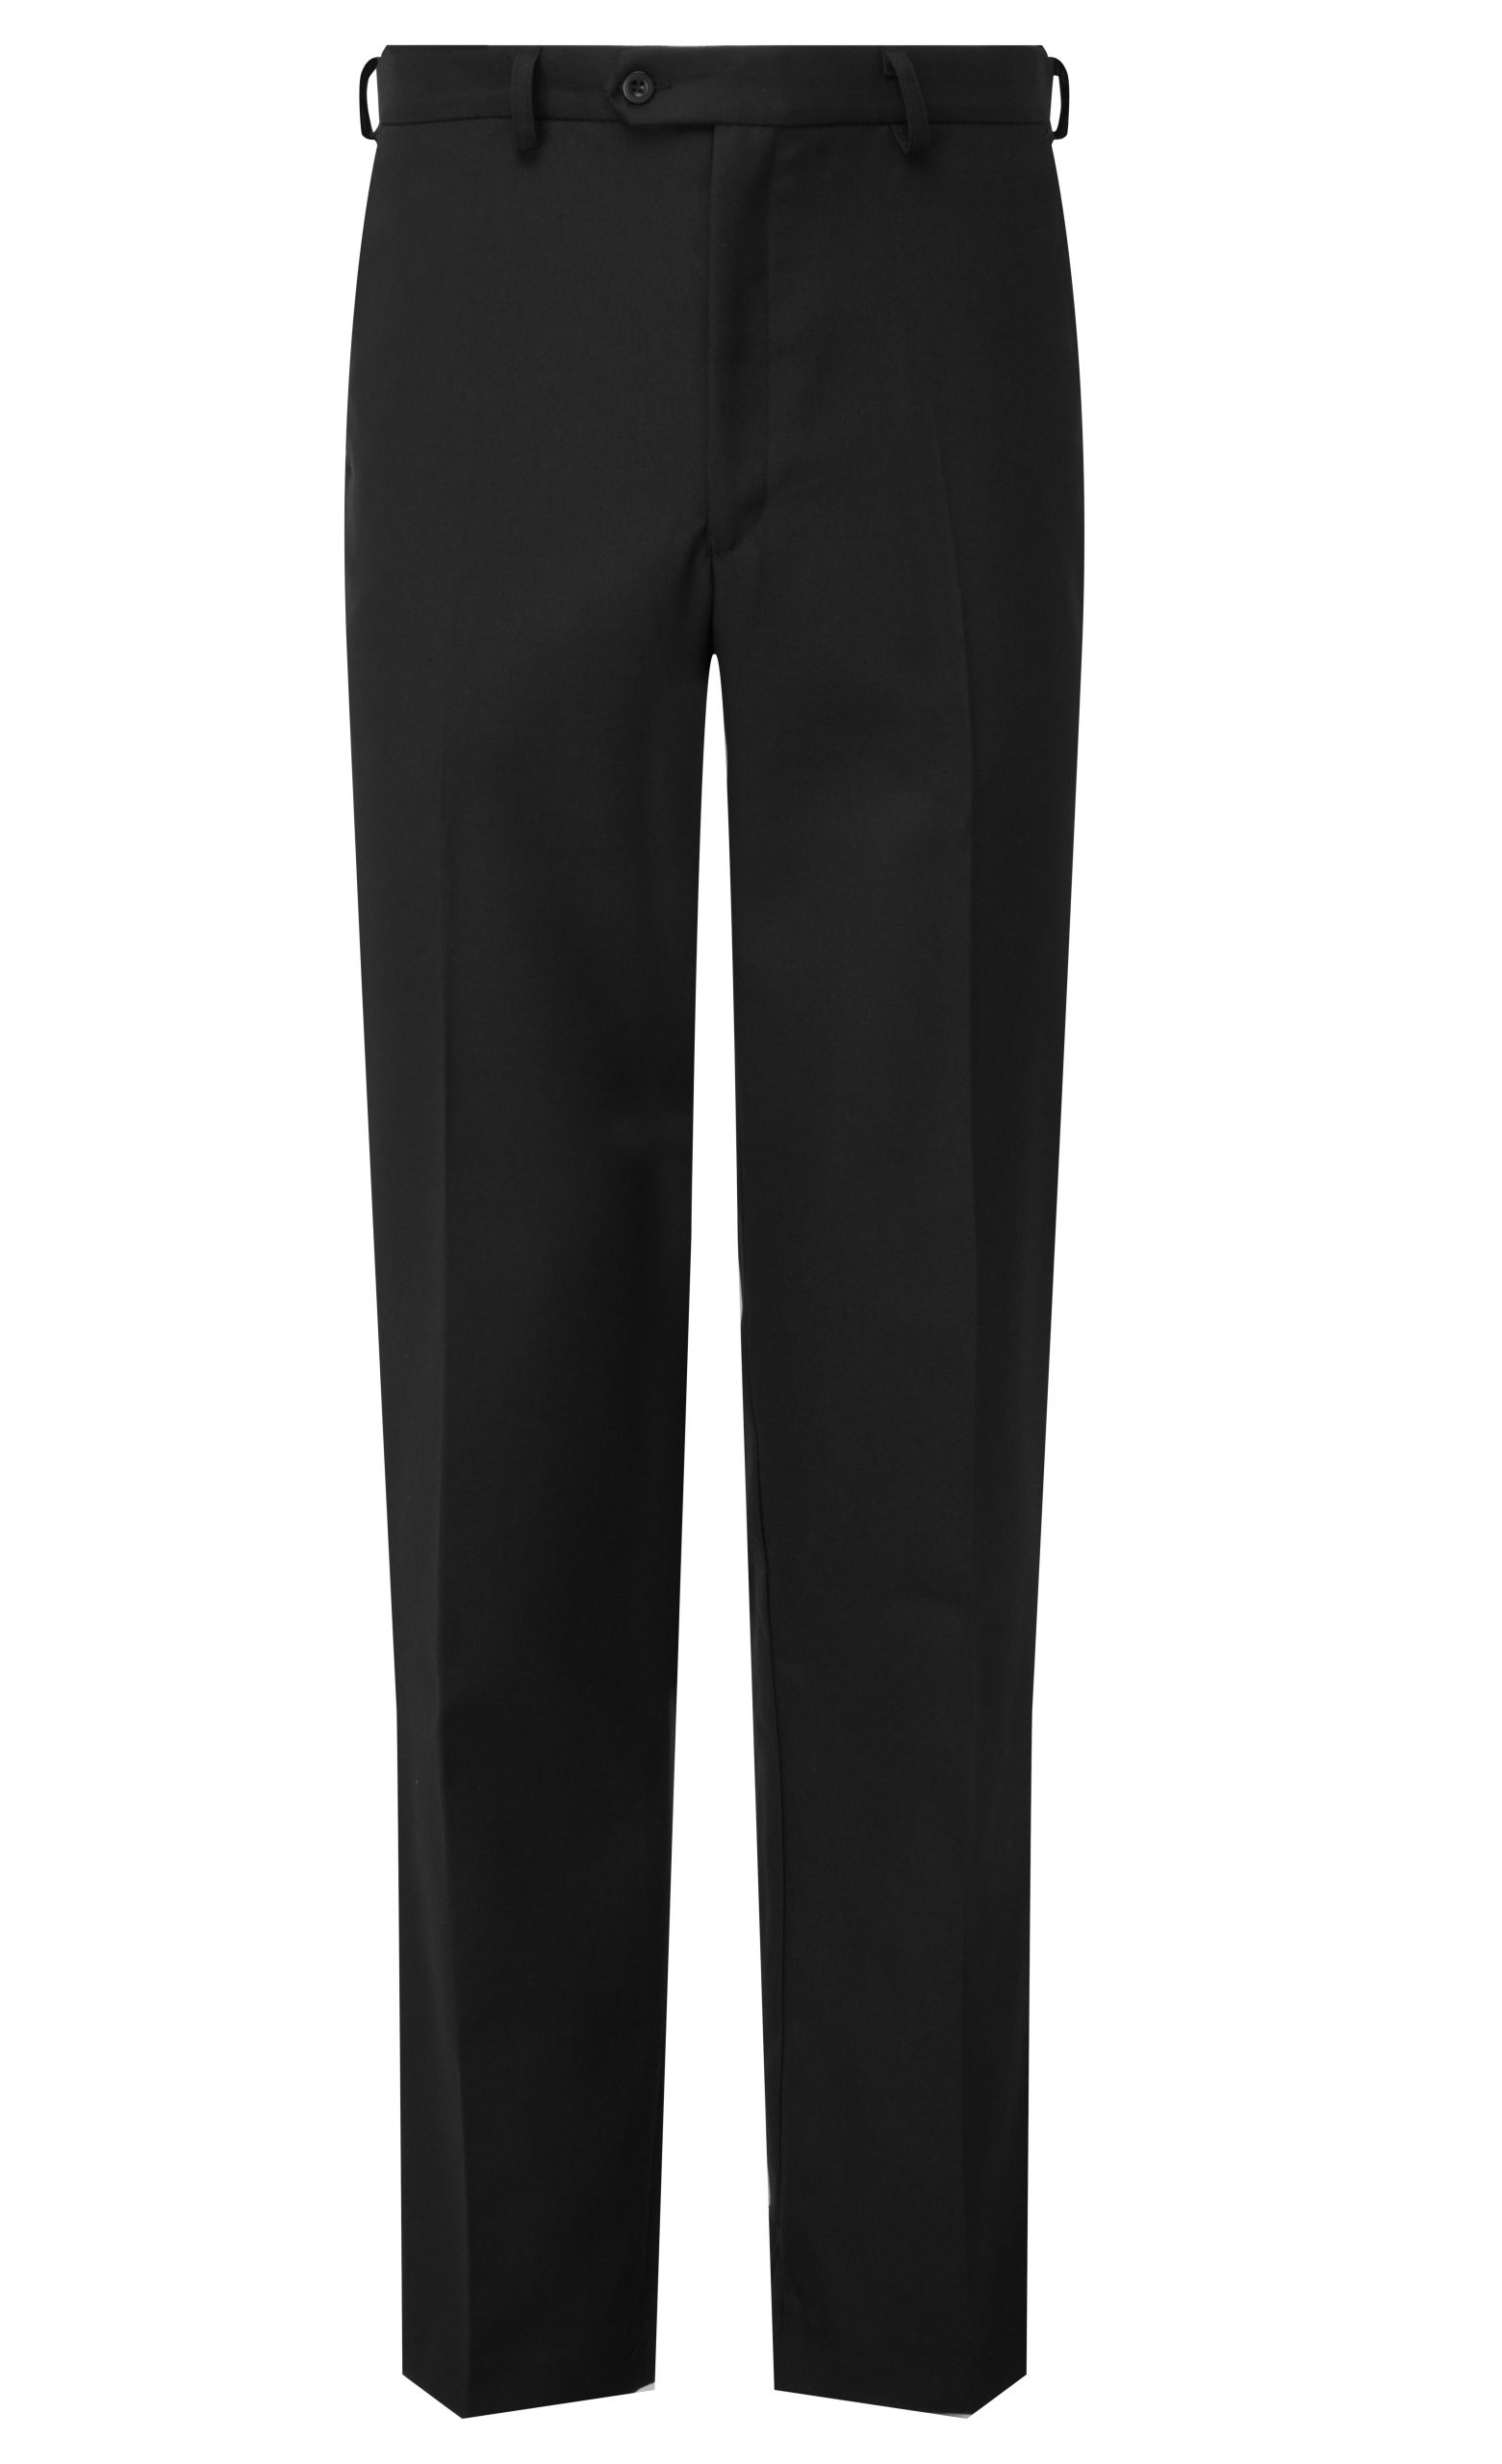 BOYS REGULAR TROUSERS - BLACK - Cain of Heswall